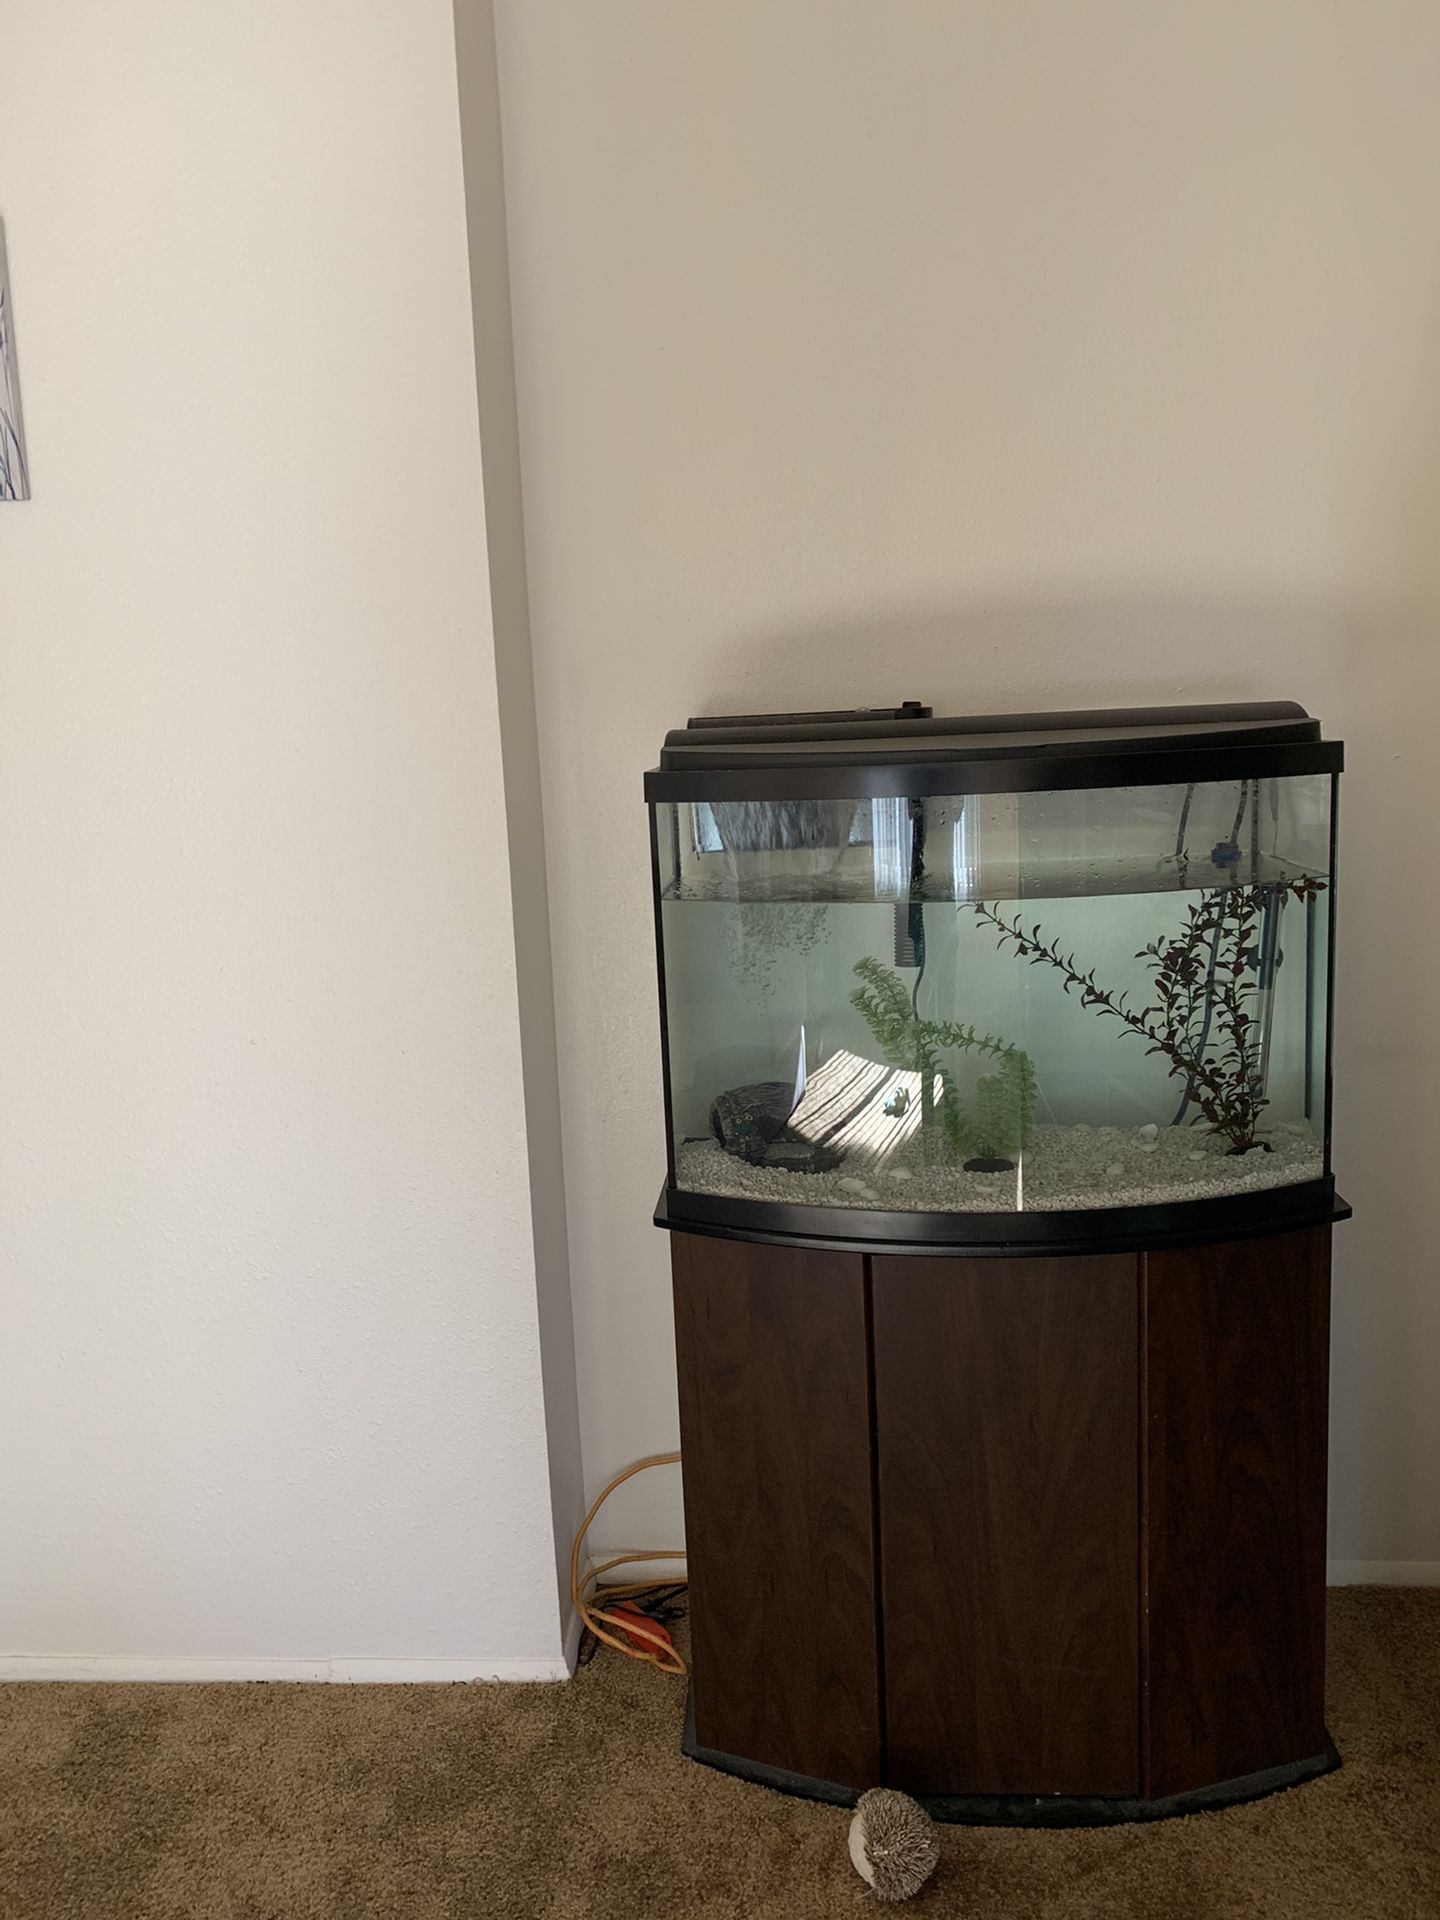 36 gal fish tank with filter and led lights